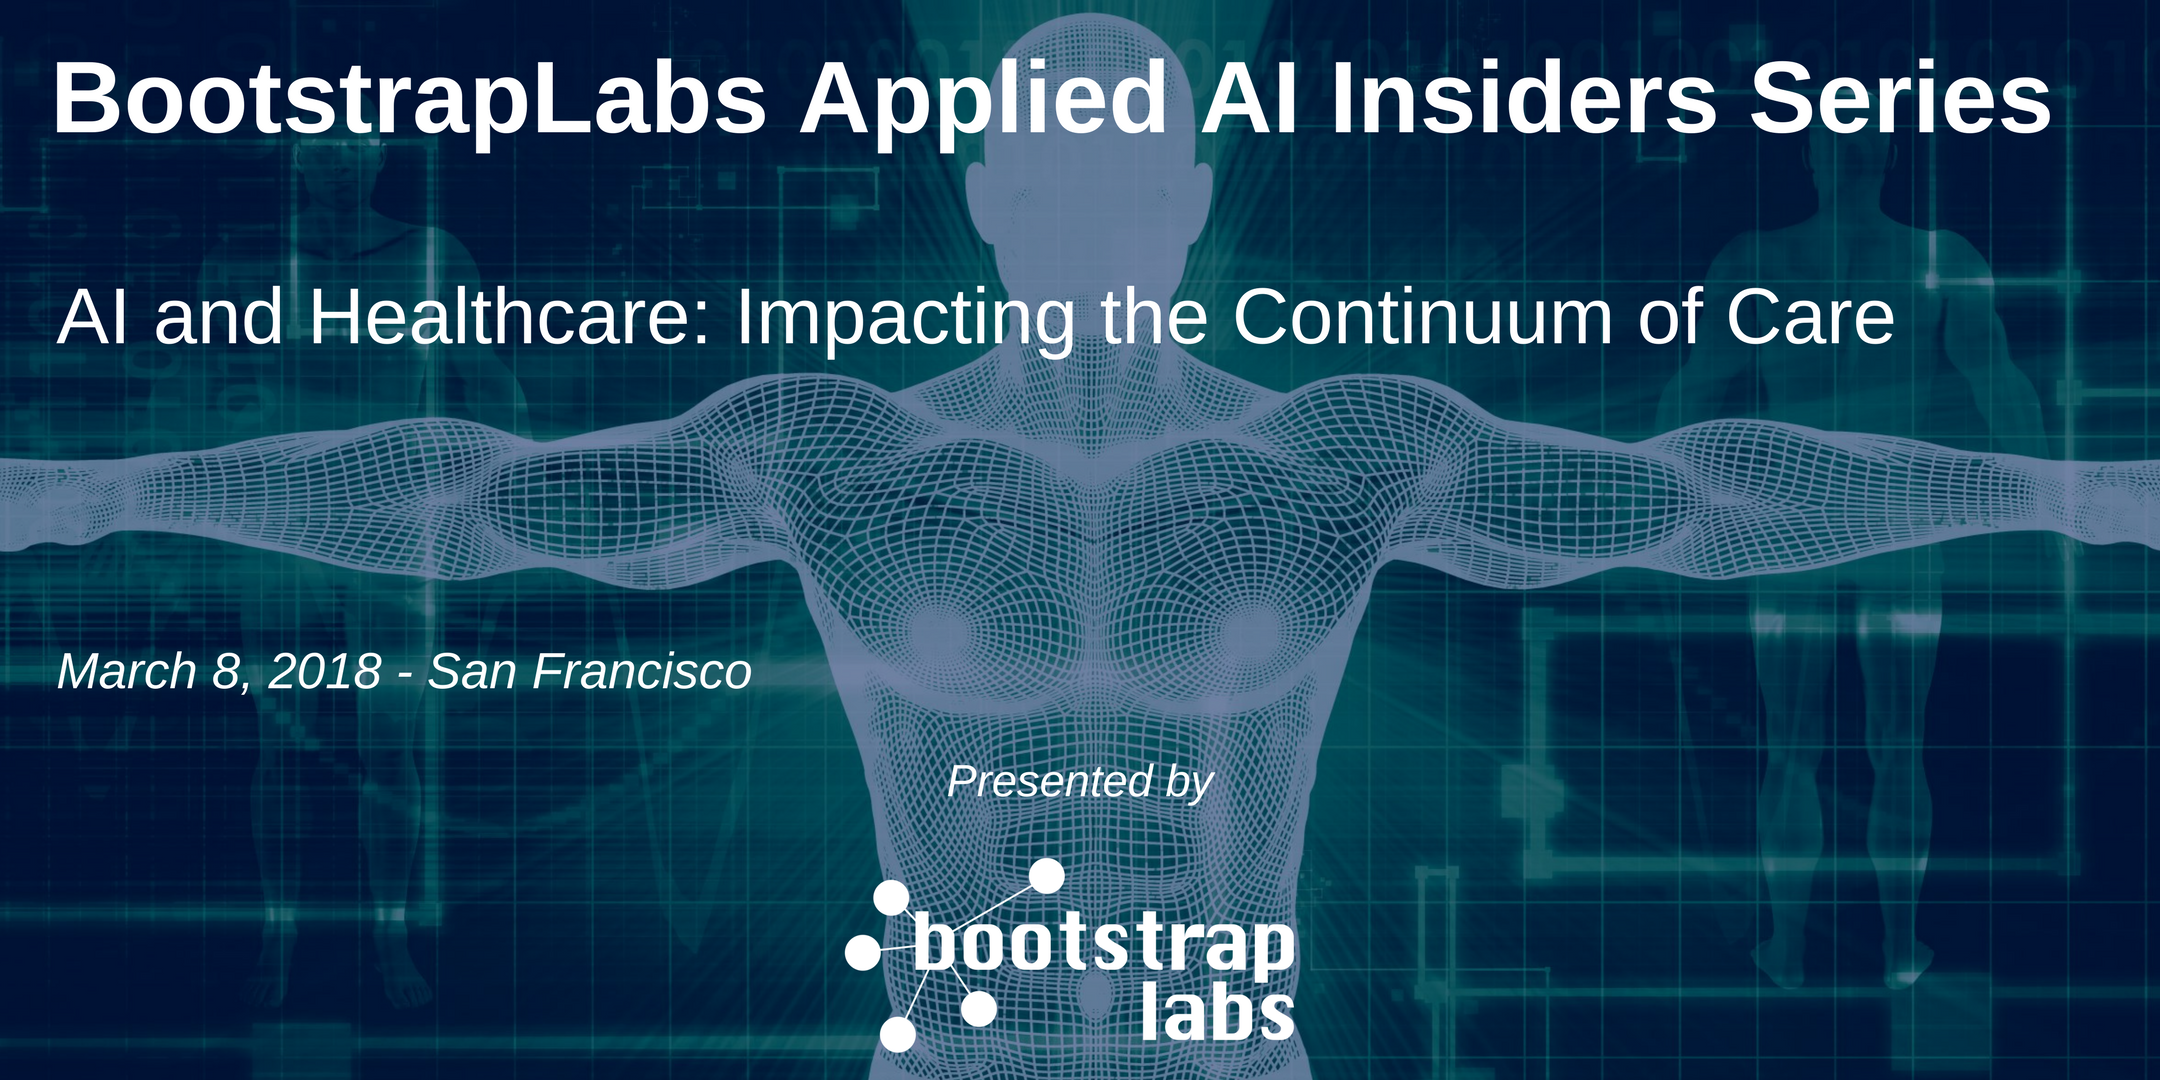 BootstrapLabs Applied AI Insiders HealthTech